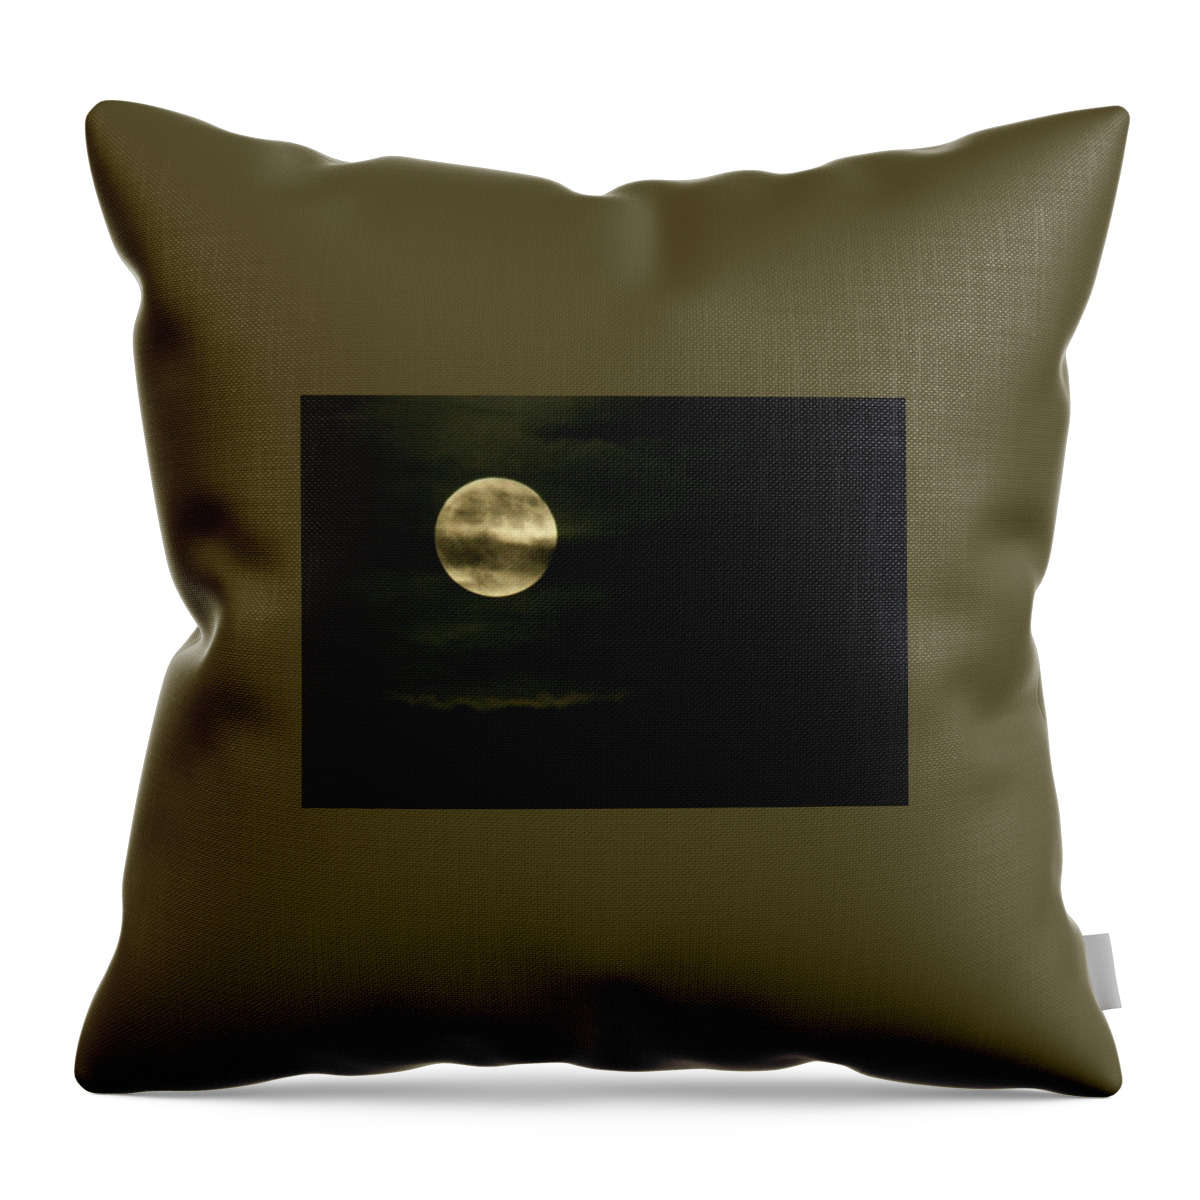  Throw Pillow featuring the photograph Super Moon Eclipse 2 by Brad Nellis